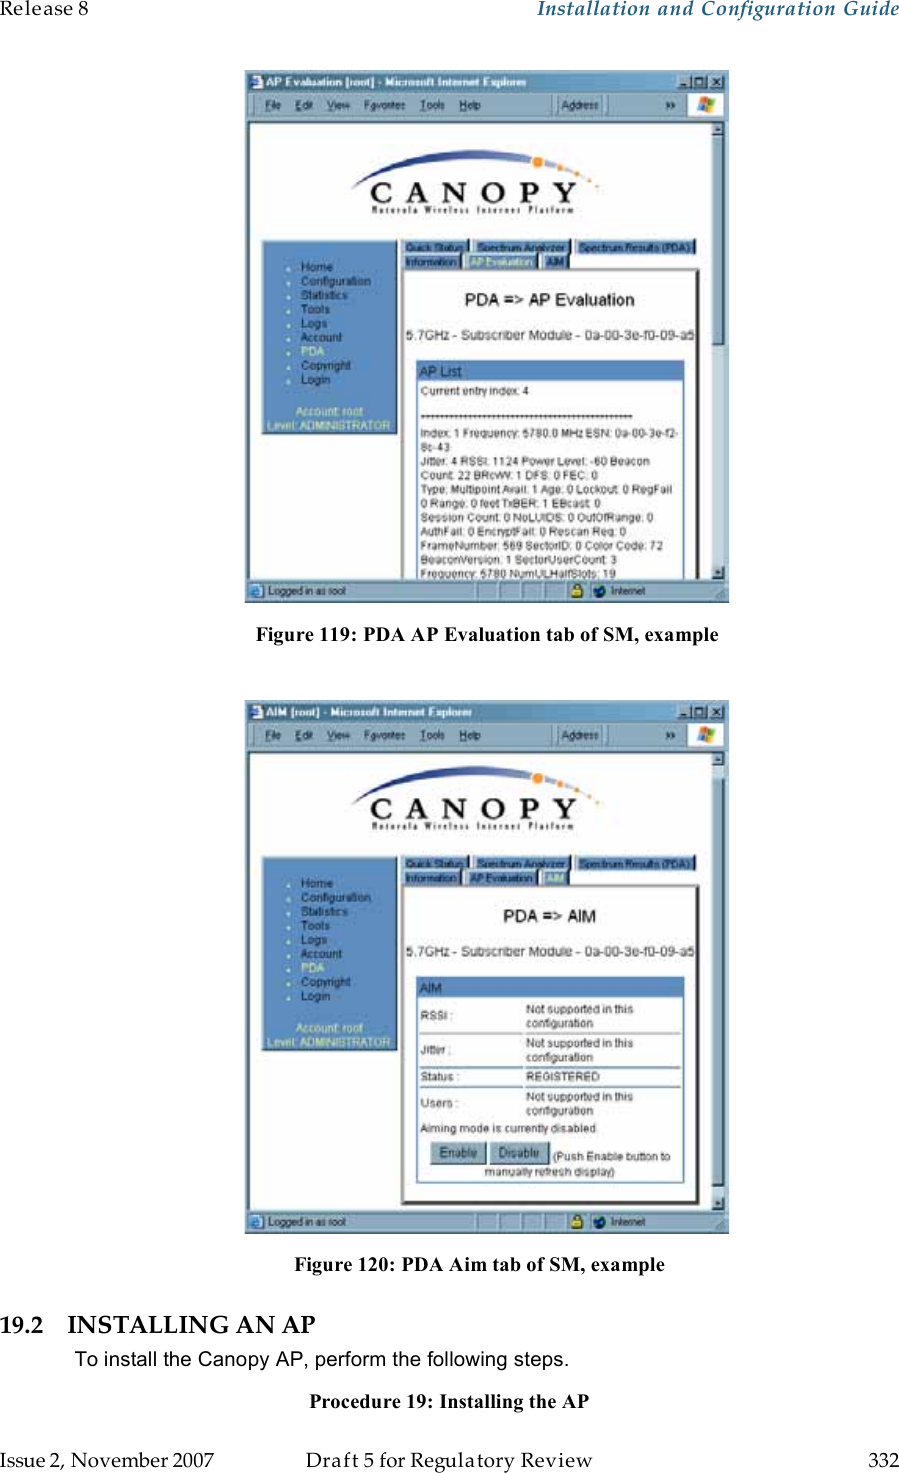 Release 8    Installation and Configuration Guide   Issue 2, November 2007  Draft 5 for Regulatory Review  332      Figure 119: PDA AP Evaluation tab of SM, example   Figure 120: PDA Aim tab of SM, example 19.2 INSTALLING AN AP To install the Canopy AP, perform the following steps. Procedure 19: Installing the AP 